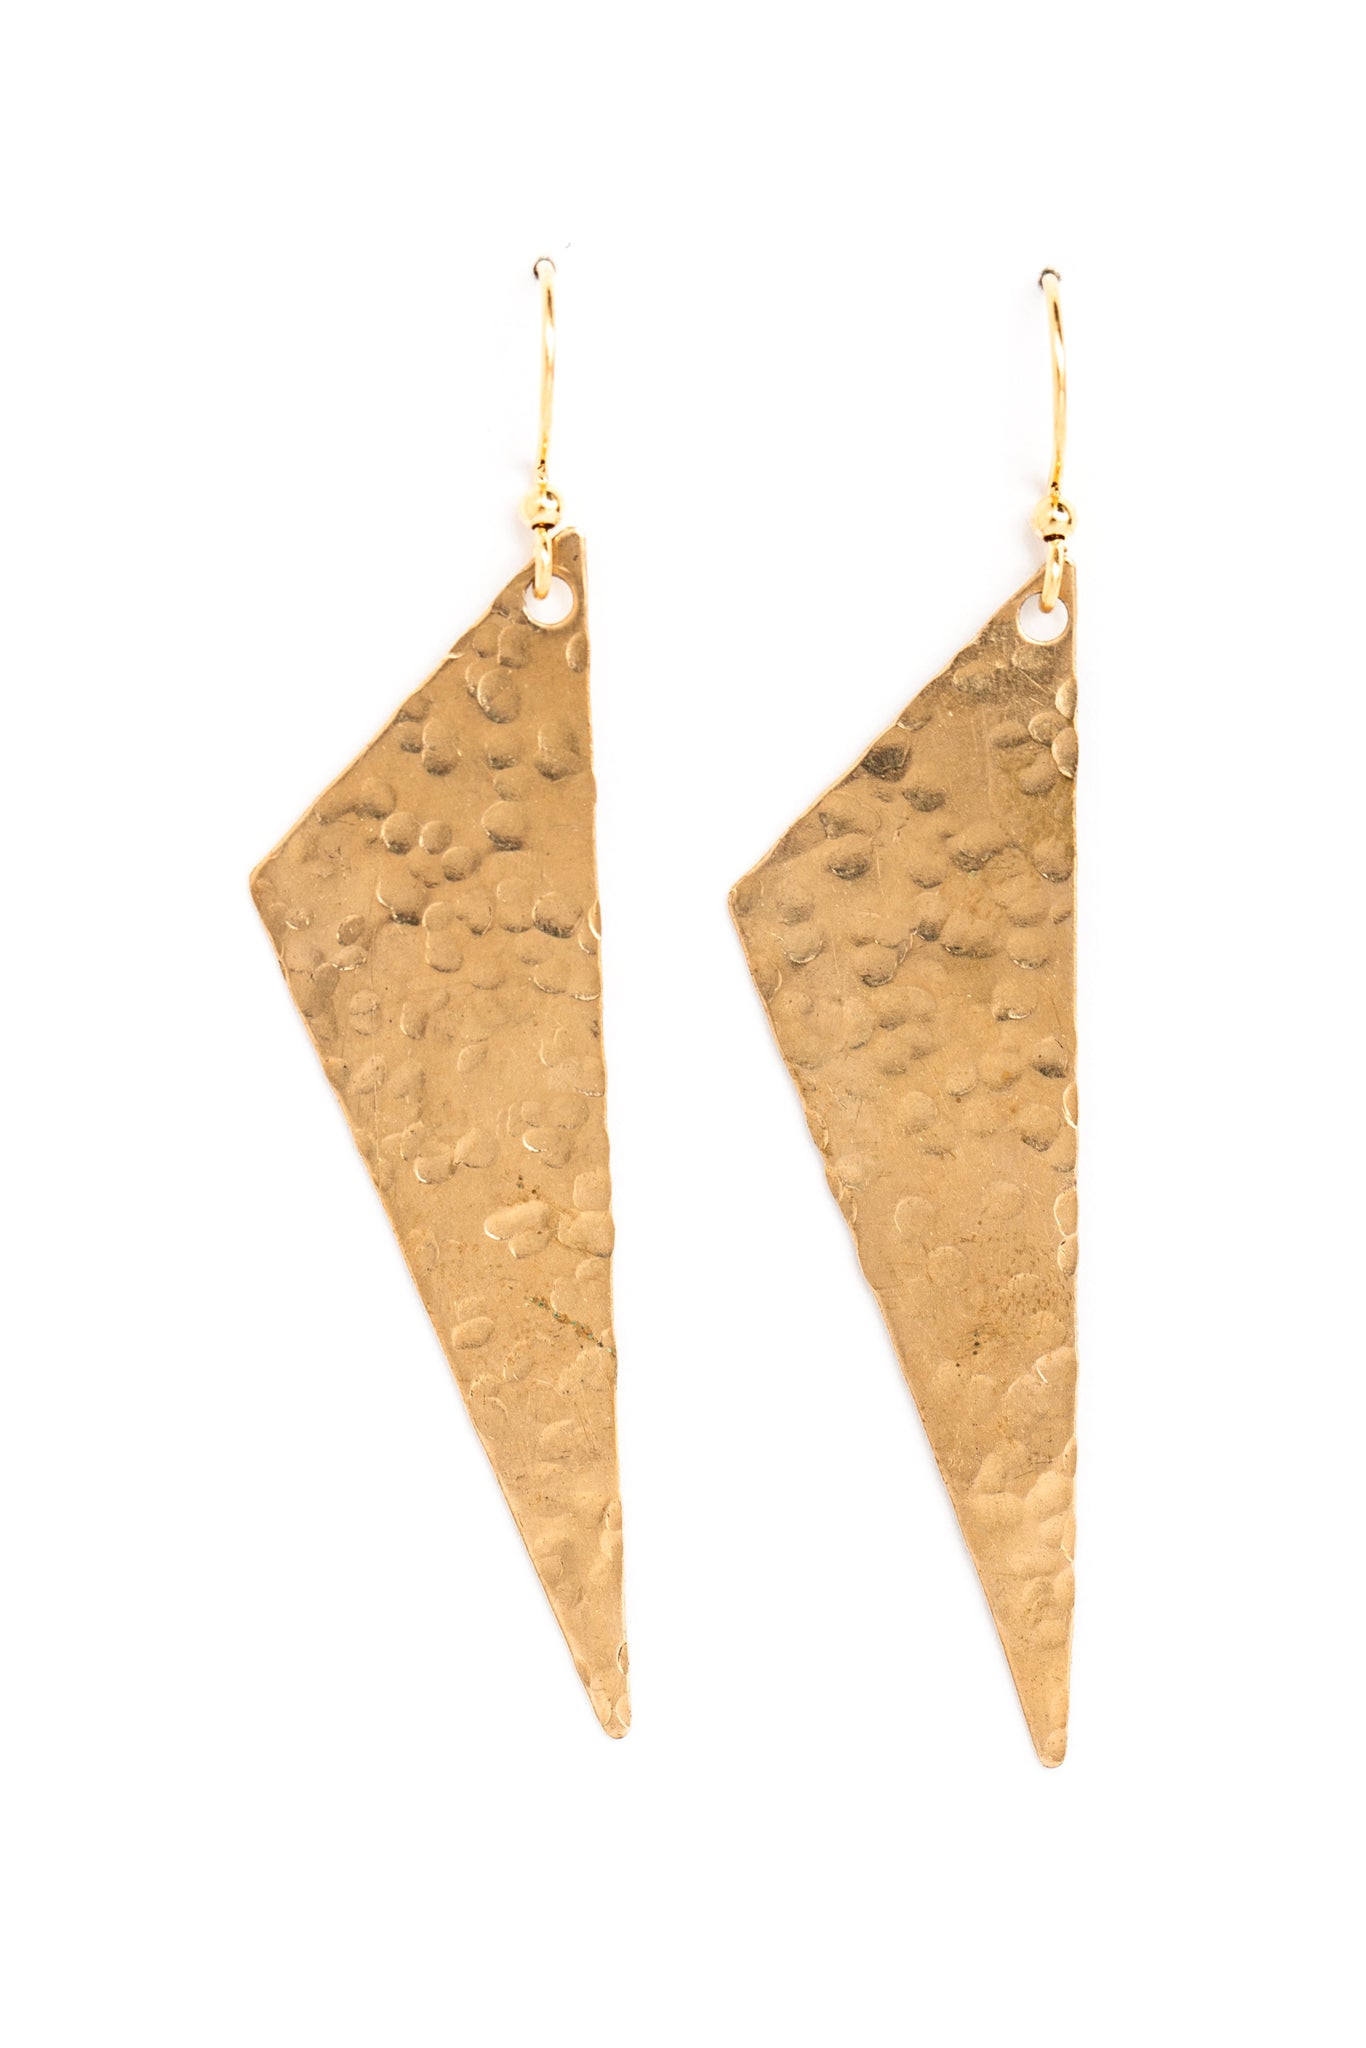 Brass Asymmetrical Triangle Earrings. A handmade piece by Collarbone Jewelry, an independent jewelry maker in Pittsburgh, PA.